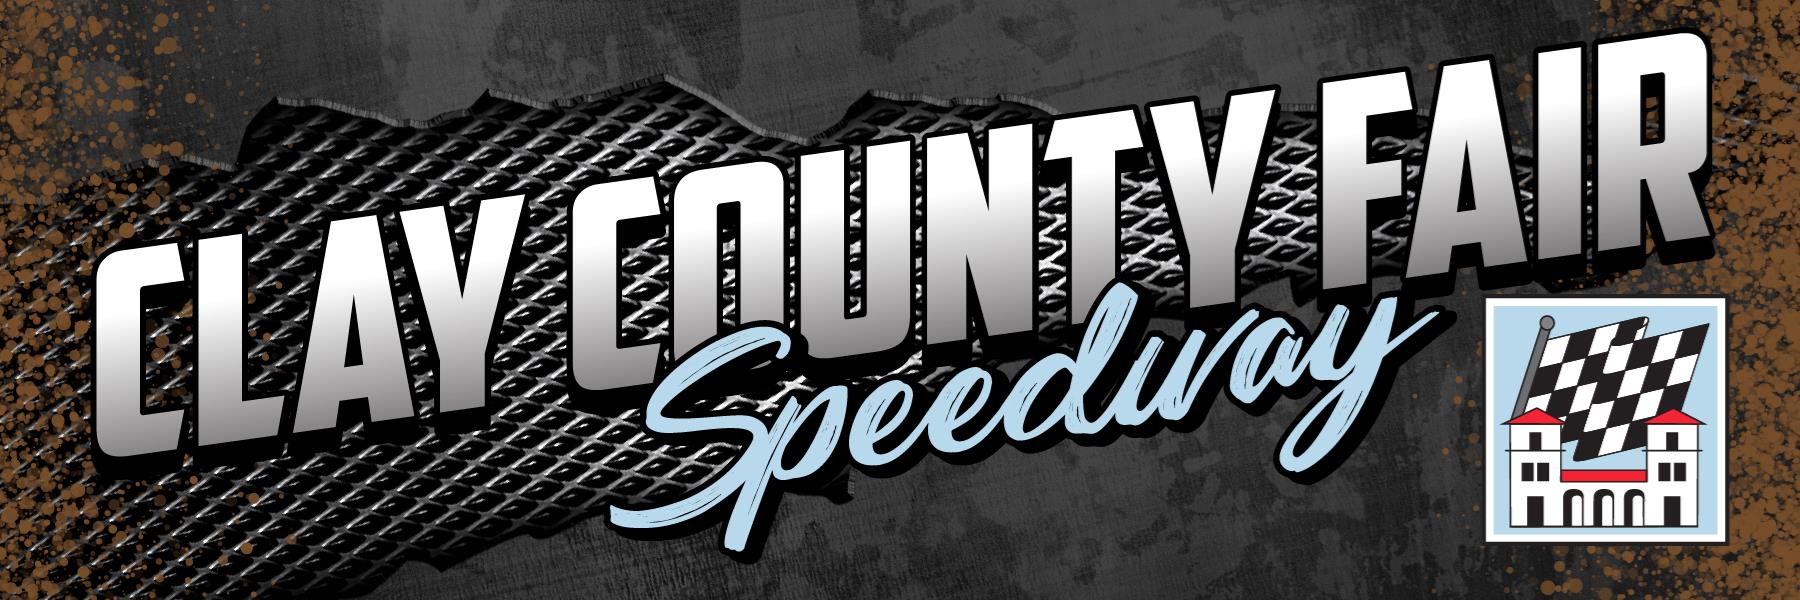 9/14/2022 - Clay County Fair Speedway